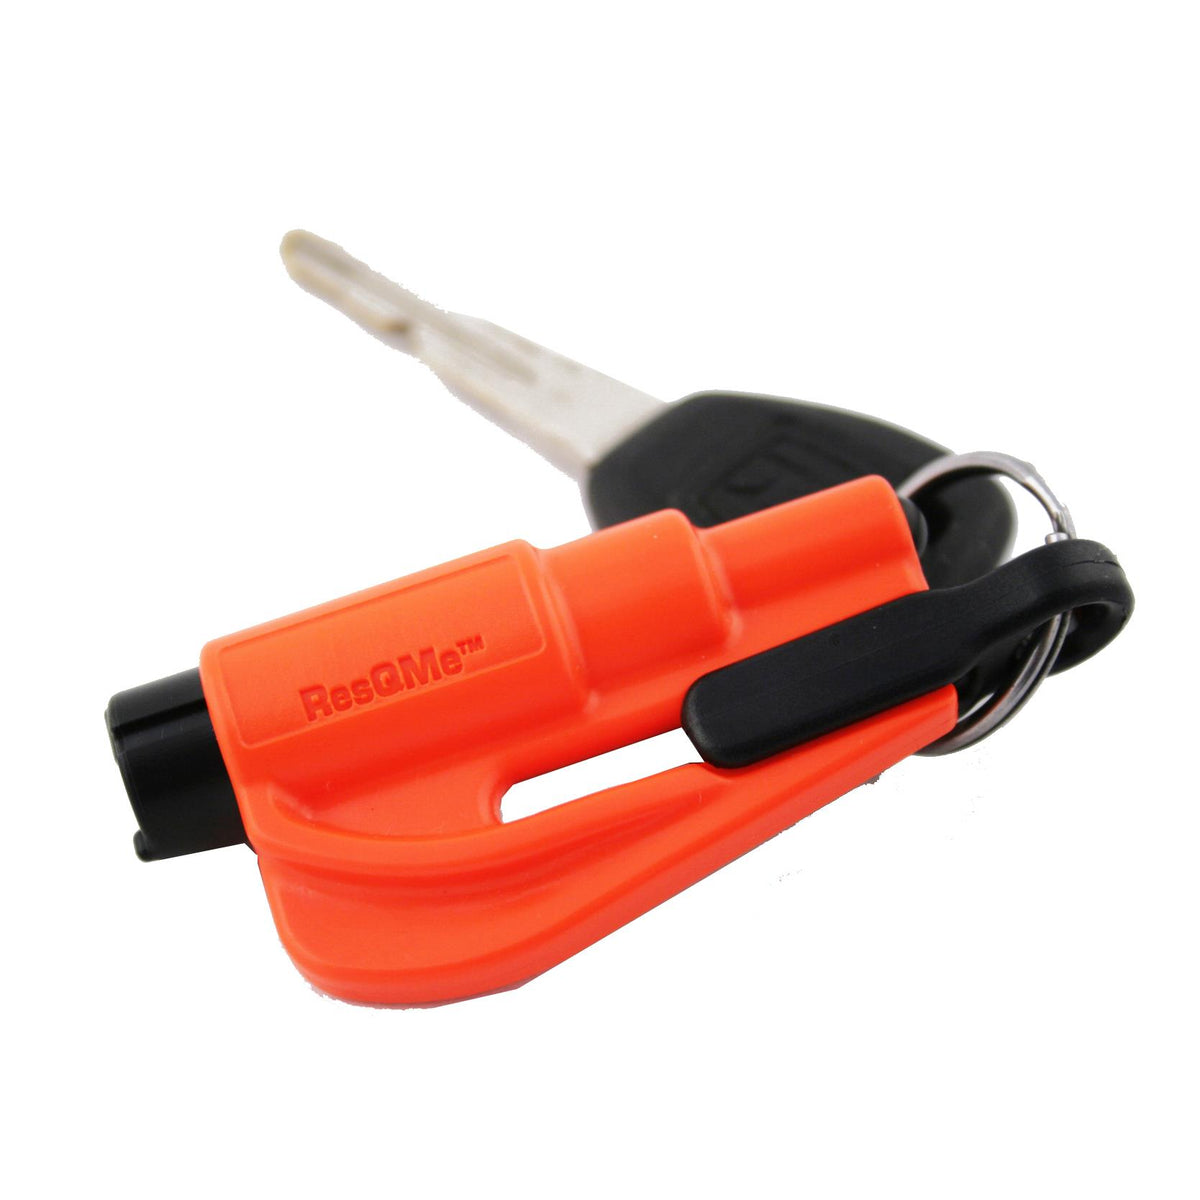 resqme Keychain Rescue Tool